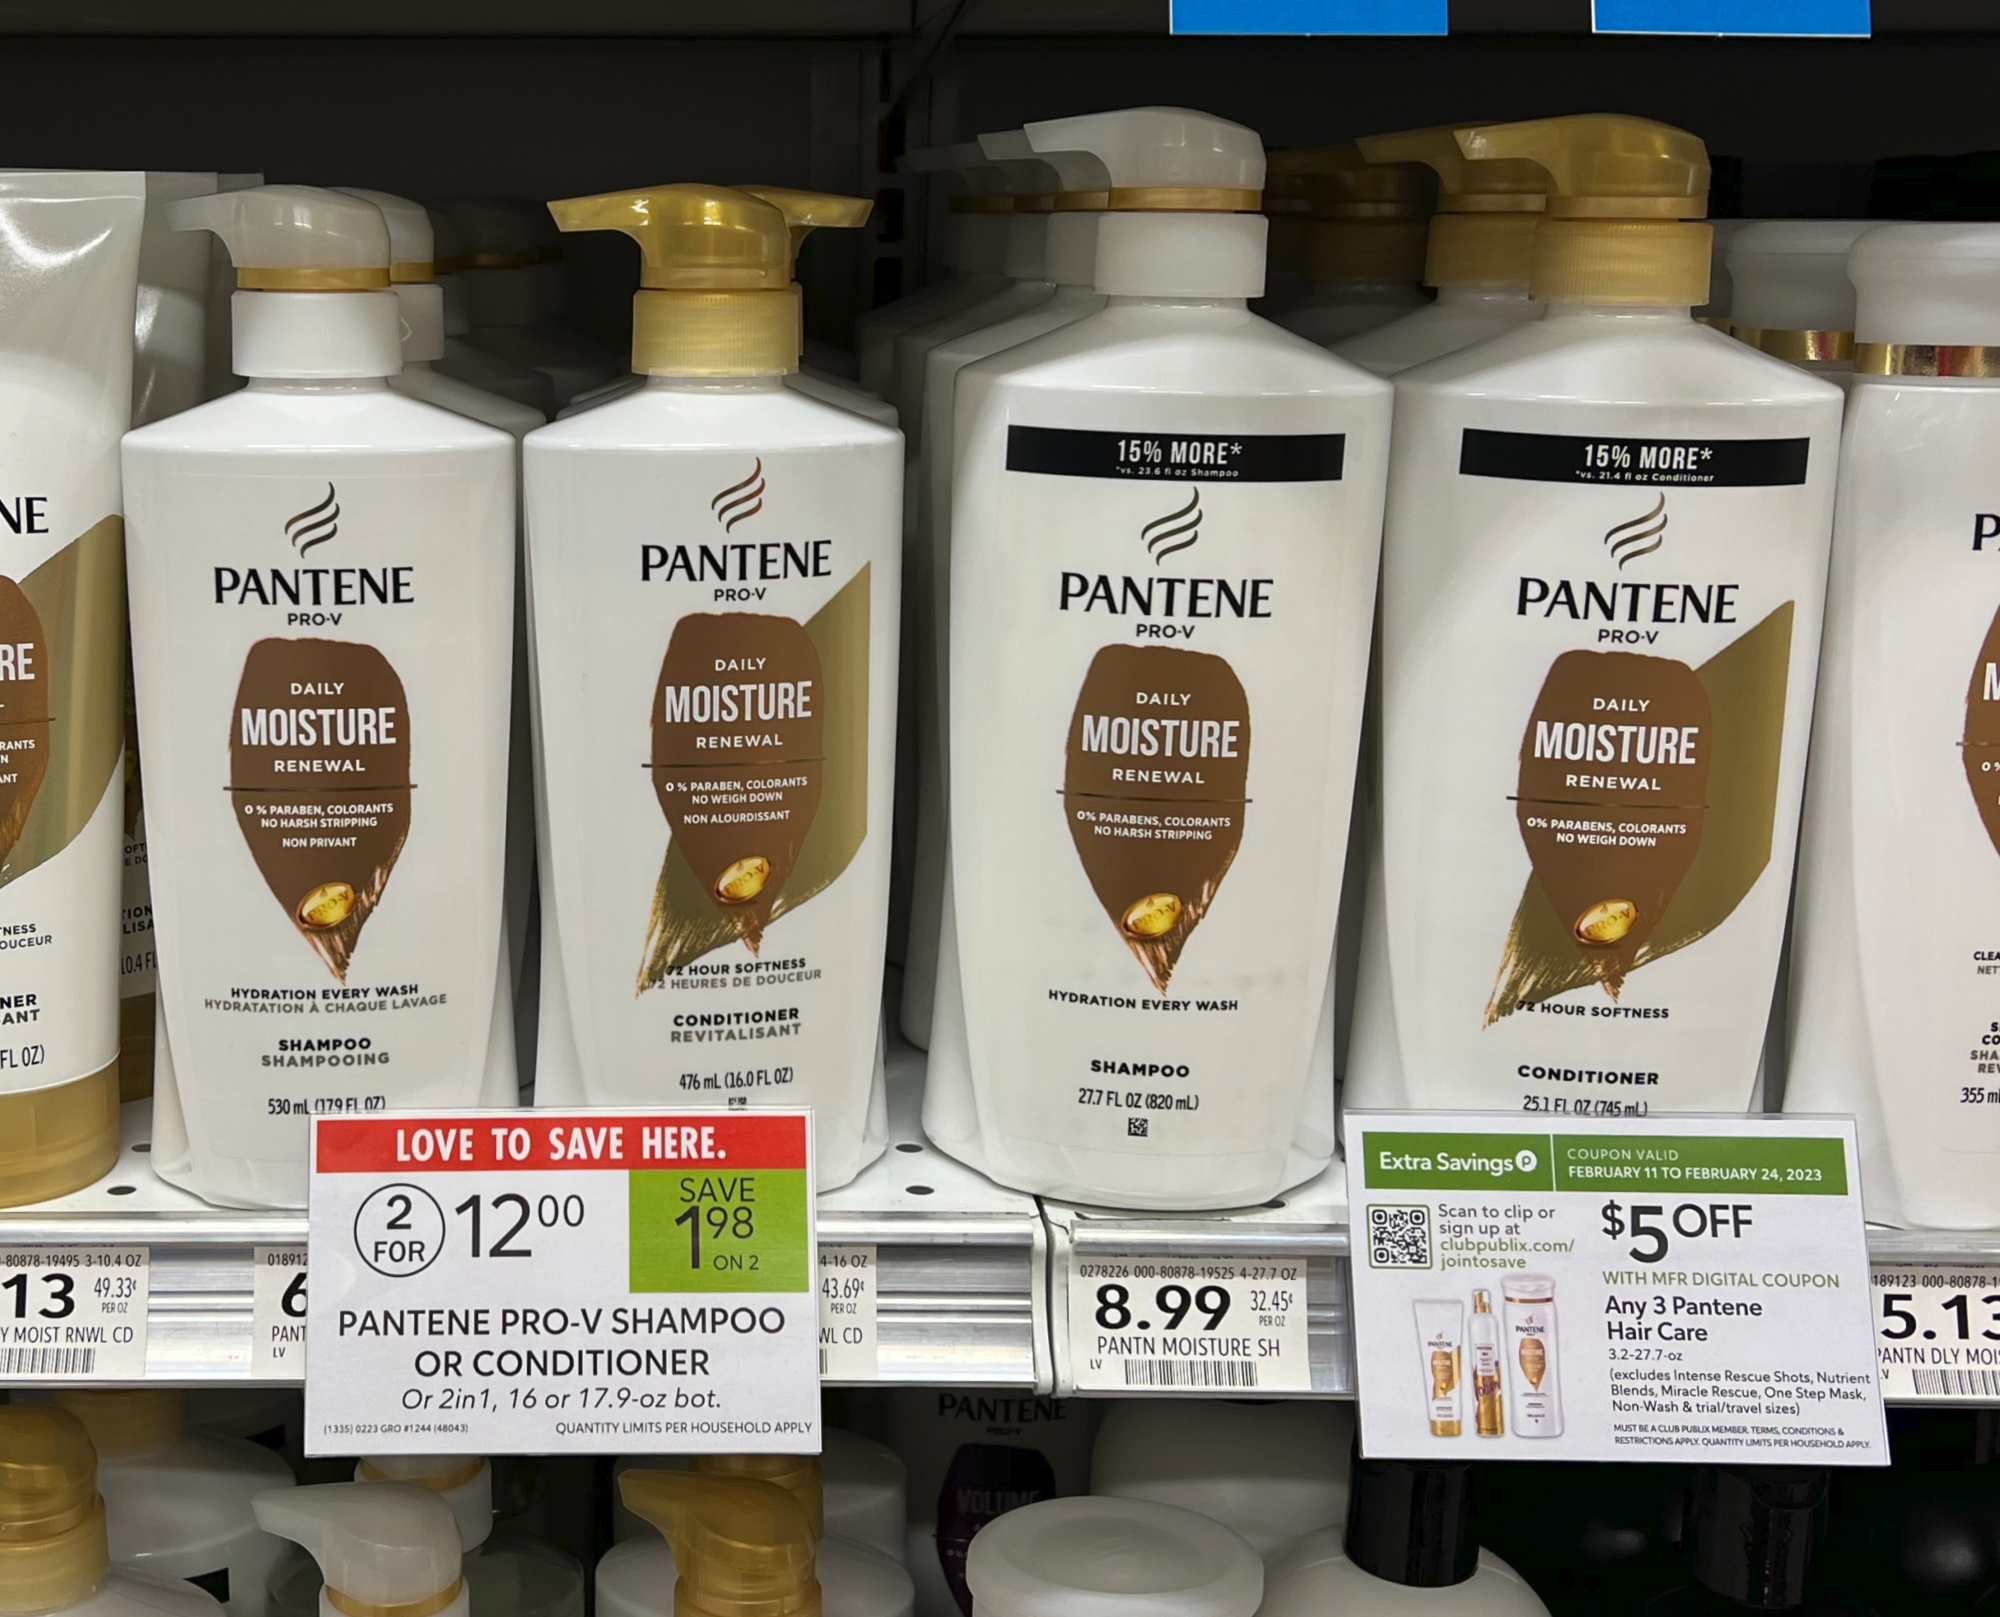 Pantene Hair Care As Low As $ At Publix (Regular Price $) – Deal  Ends 2/25 - iHeartPublix